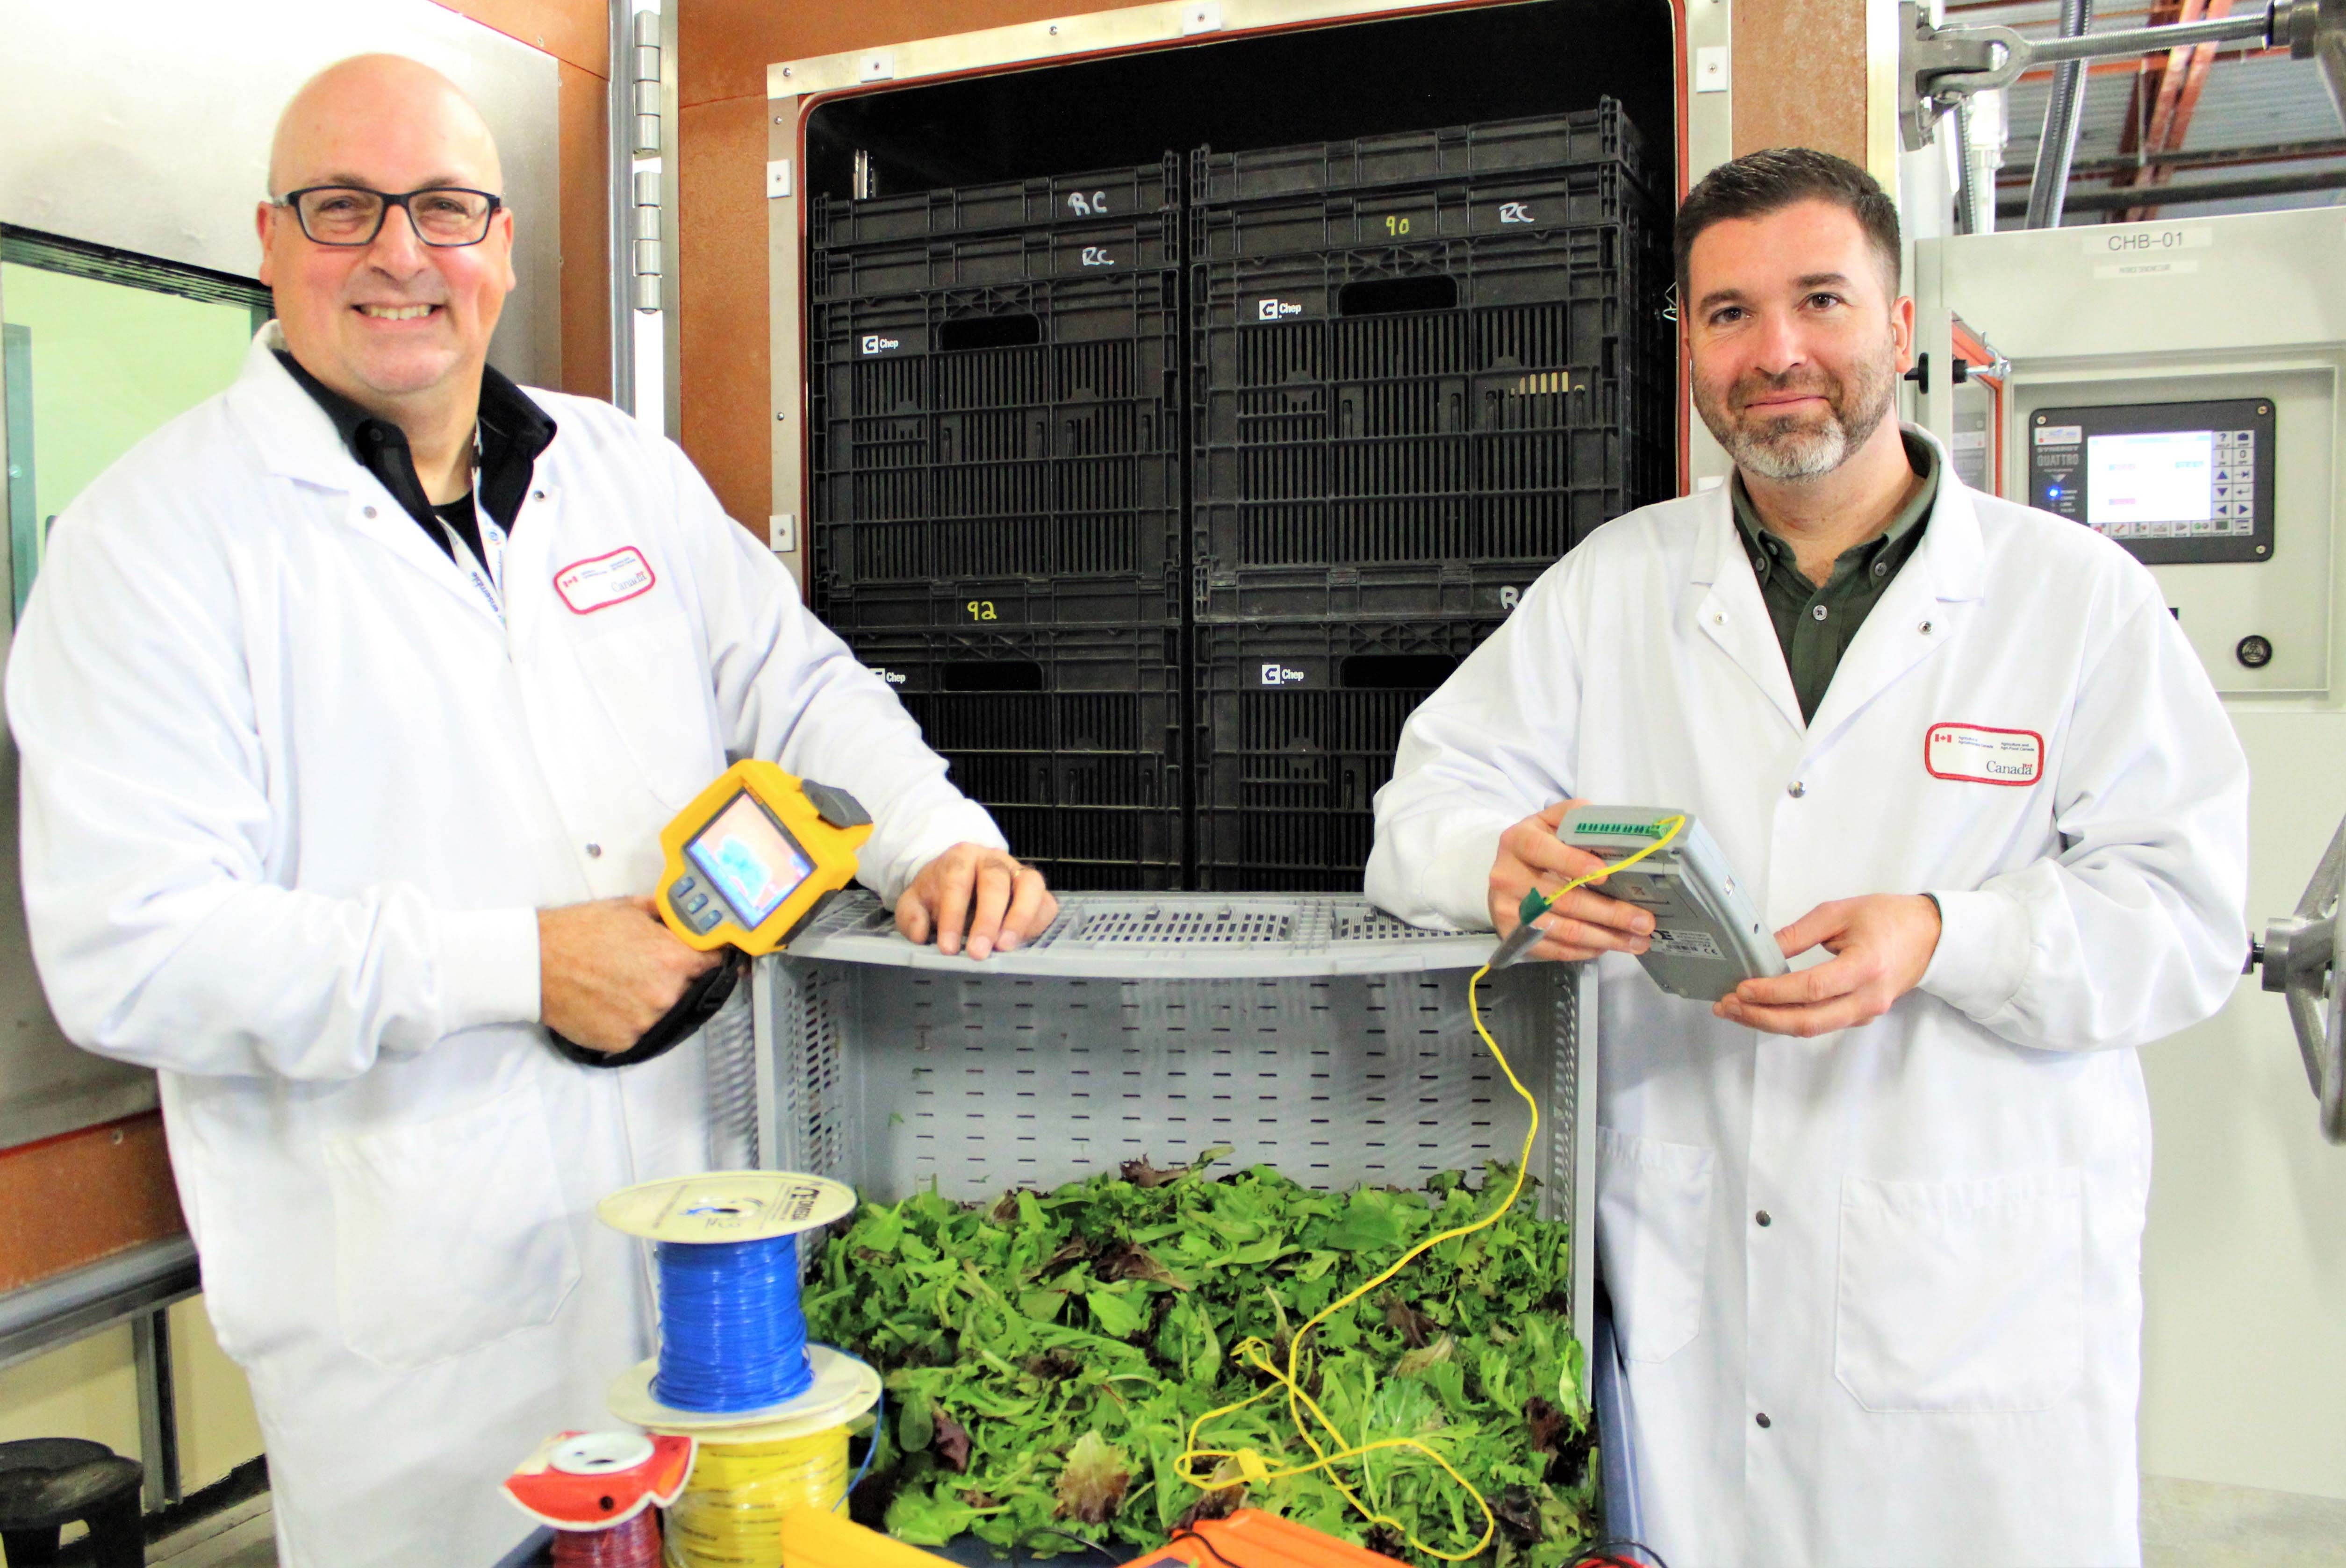 Researchers Sébastien Villeneuve (left) and Louis Sasseville (right) are holding measurement tools to assess the state of conservation of lettuce in a transport conditions trial. A crate full of green lettuce is between the two researchers. 